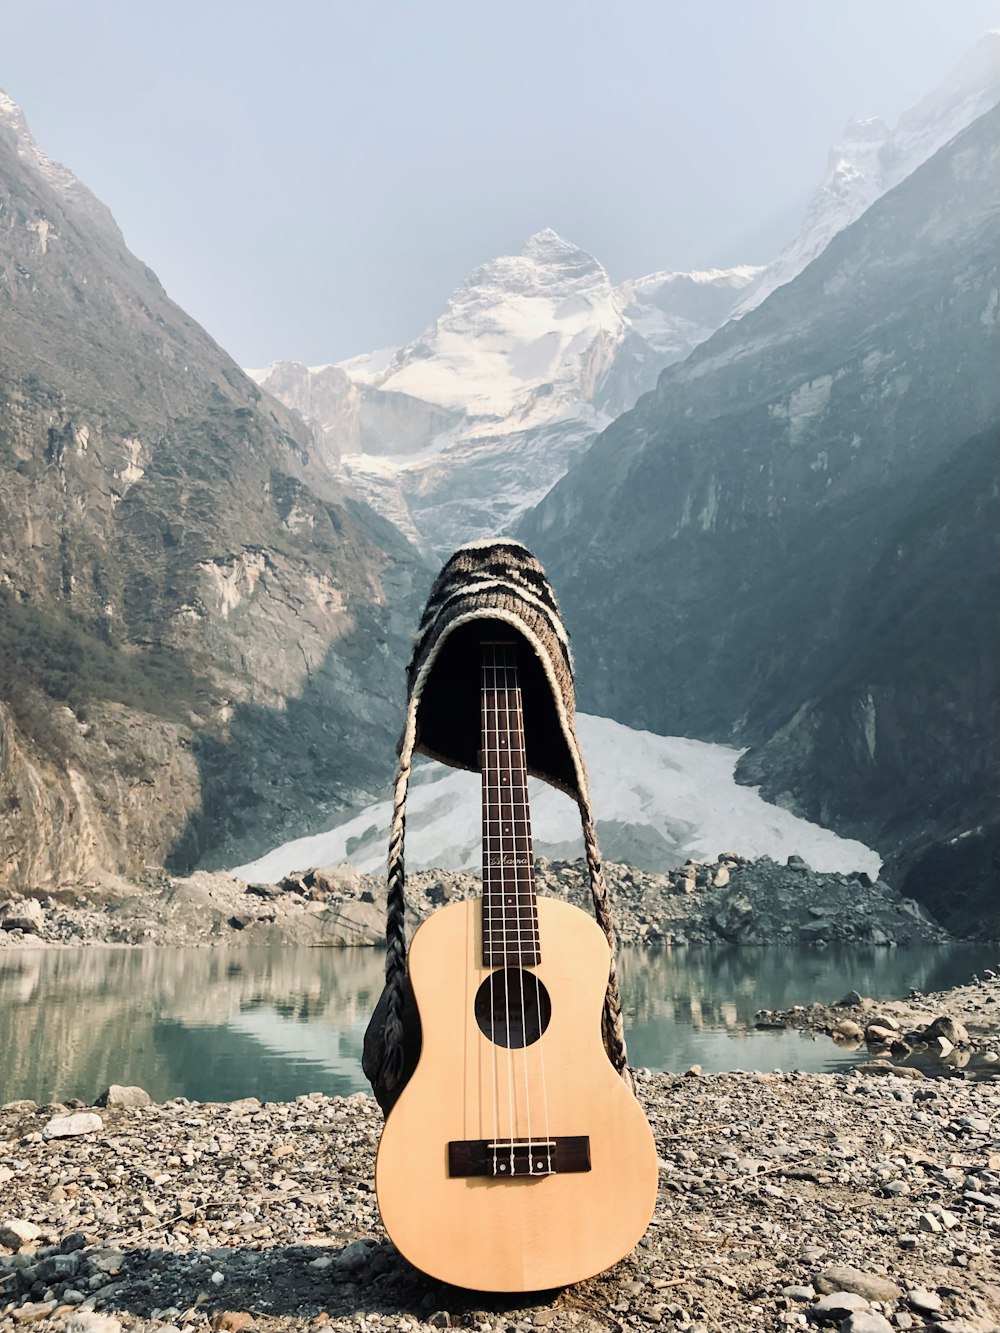 brown acoustic guitar on brown wooden dock near lake and snow covered mountain during daytime